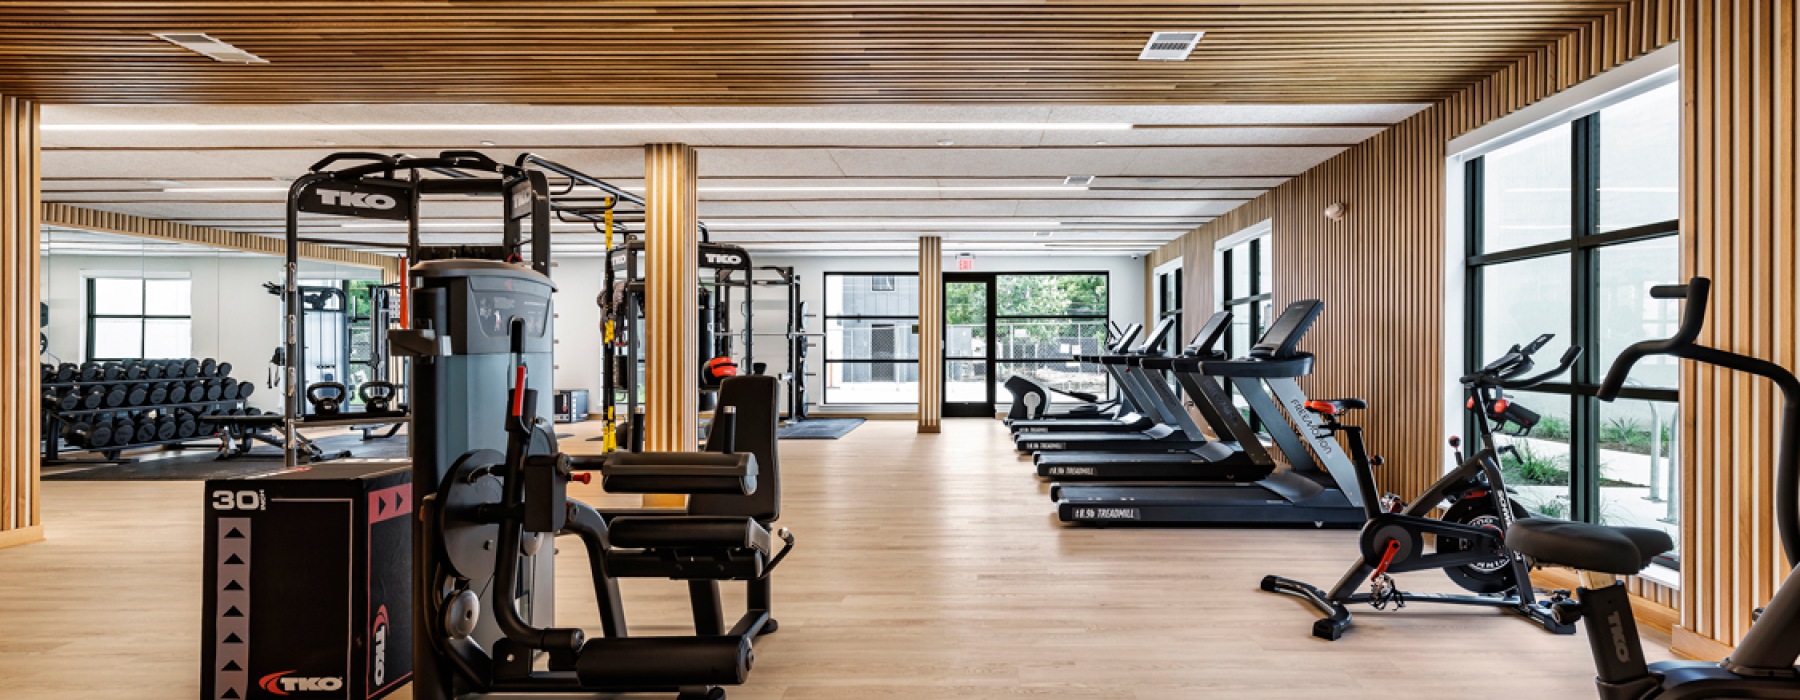 gym featuring modern wood details on the wall and high tech gym equipment 